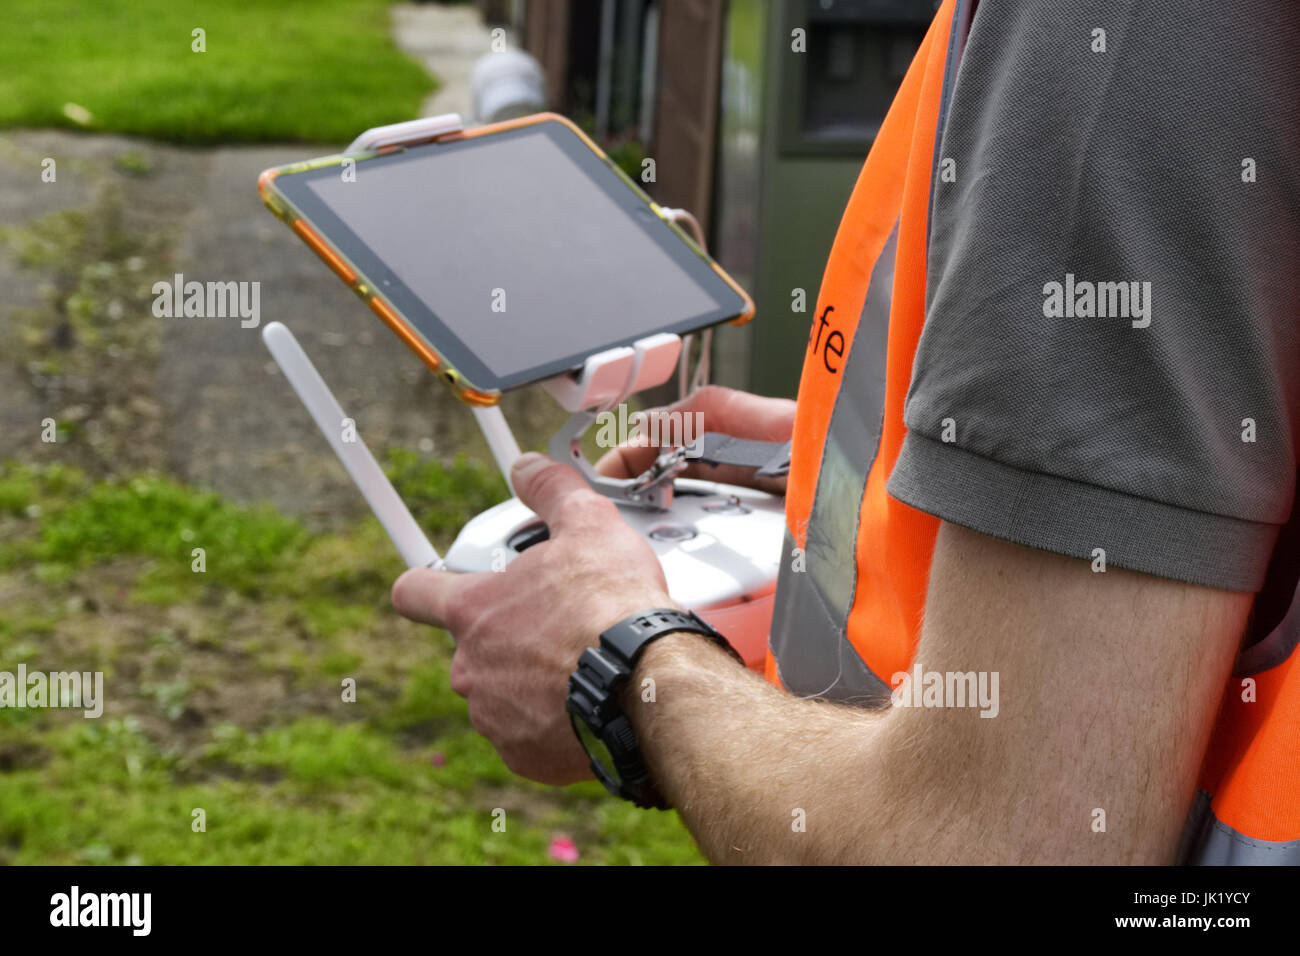 Licensed Drone Operator using Remote Control in the UK Stock Photo